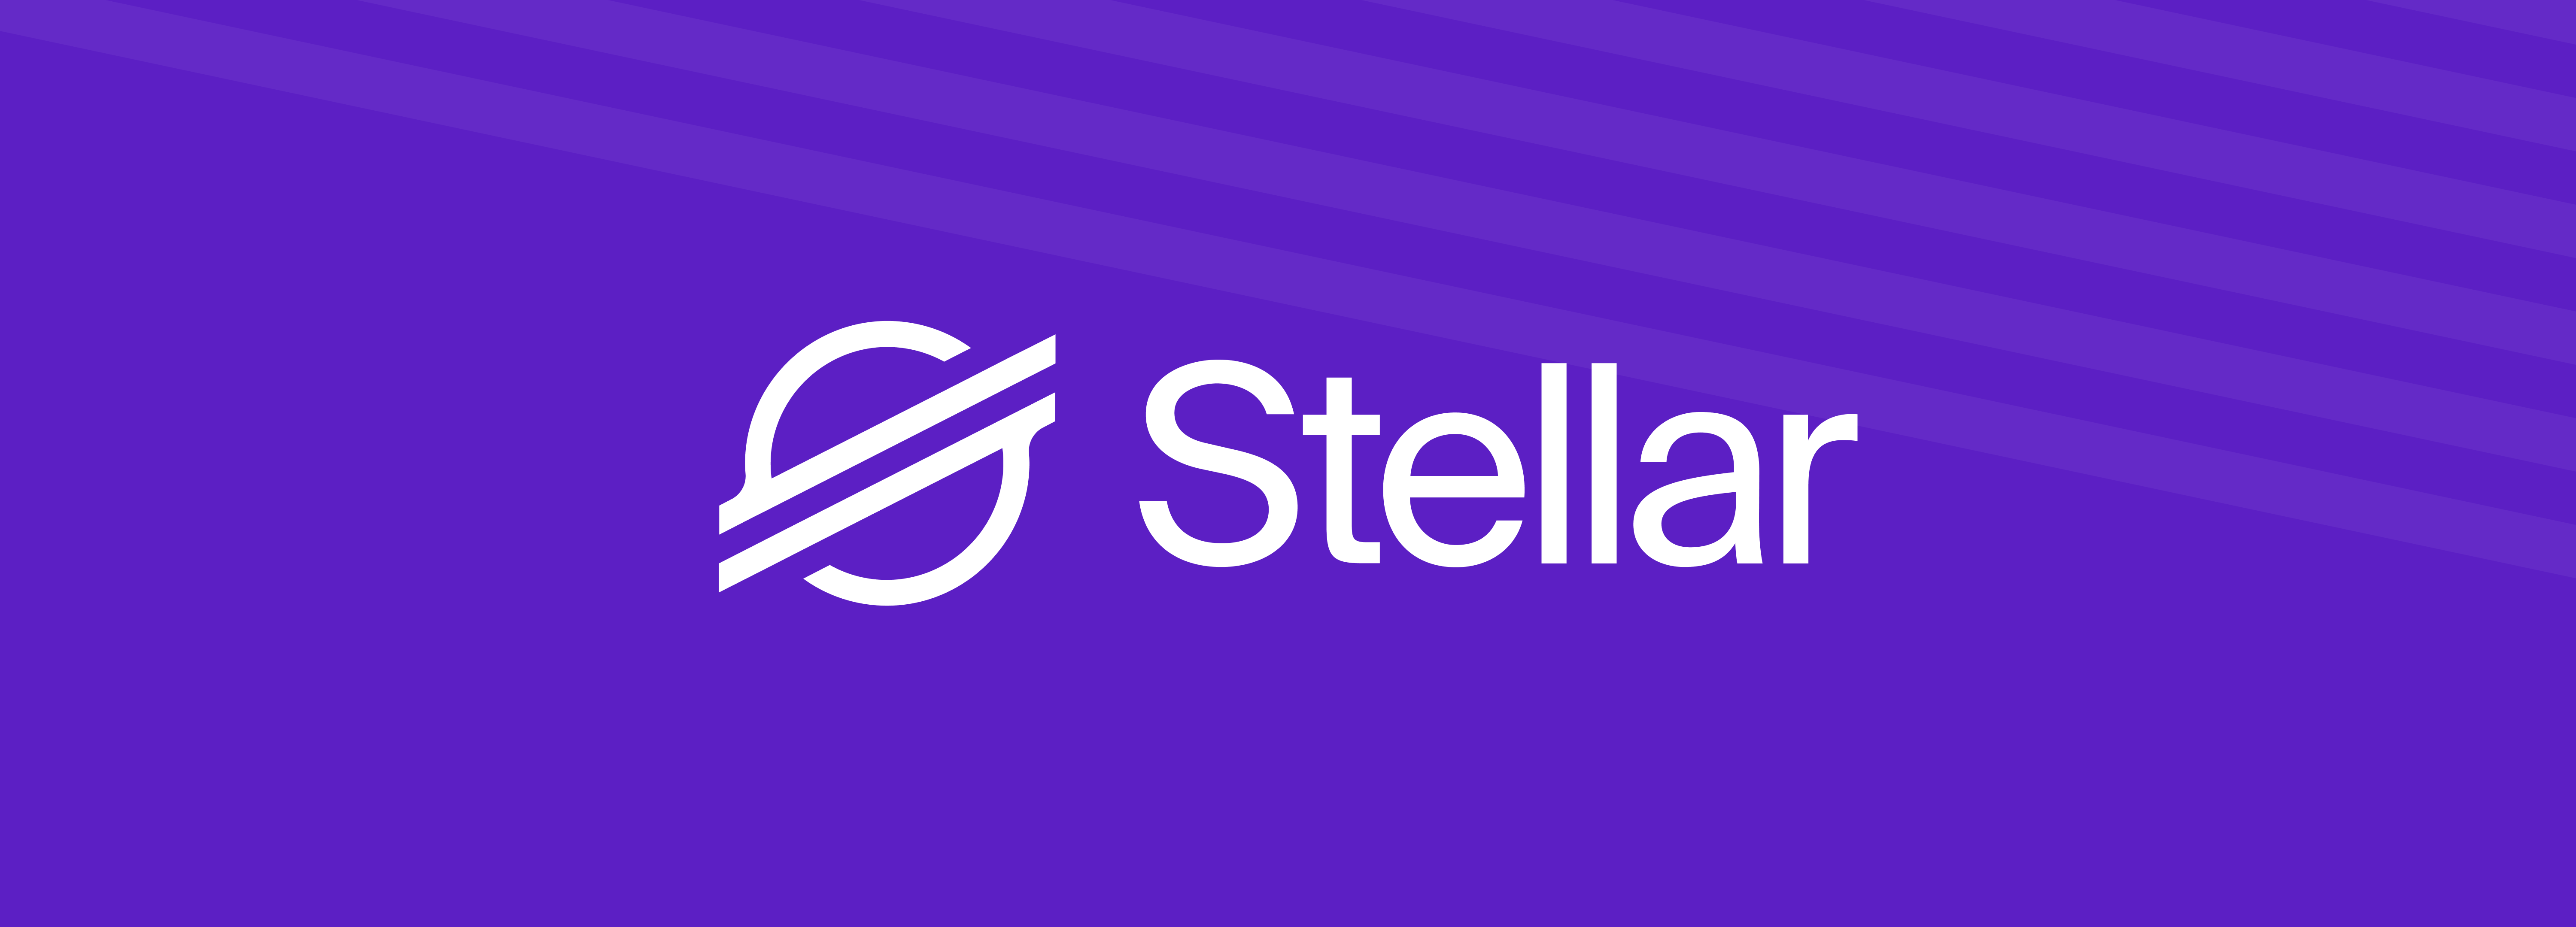 Stellar: A Decentralized Network for Cryptocurrency Creation and Trading